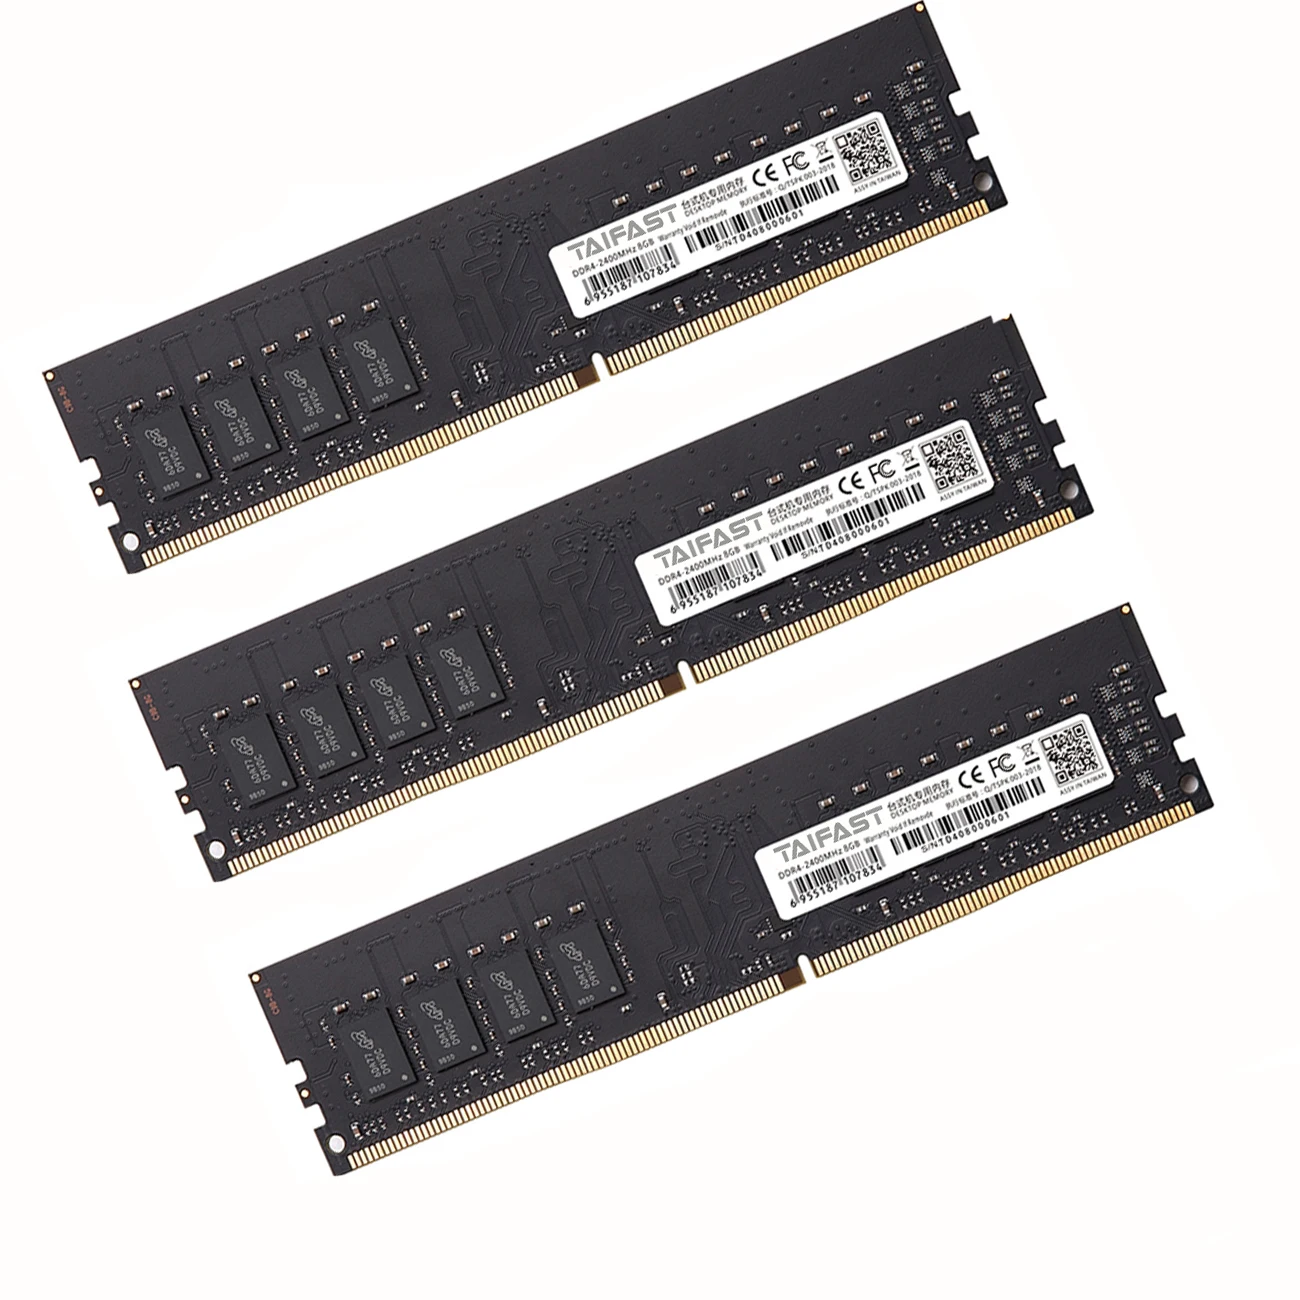 

DDR4 Memory RAM Taifast 4GB/8GB/16GB for desktop computer parts PC 2133MHz/2400MHz/2666MHz Fantastic quality low price DDR4 Ram